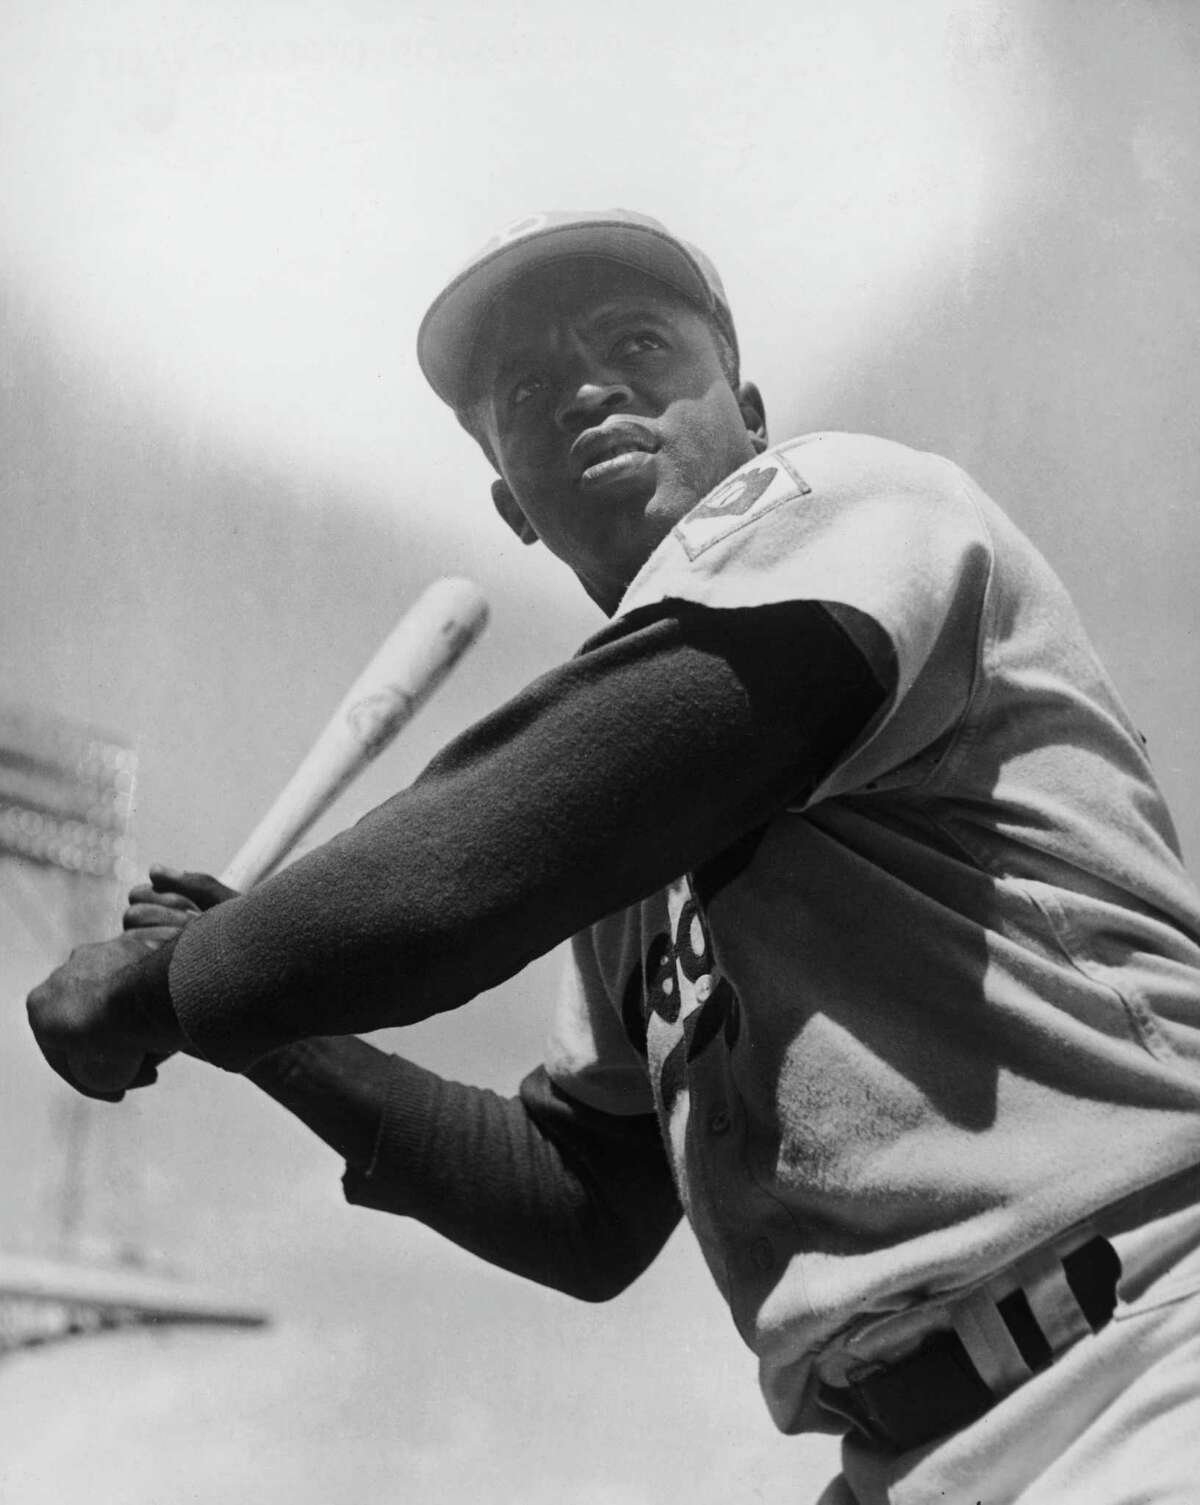 Jackie Robinson, the Major League Baseball’s first Black player, moved to Stamford in the 1950s.